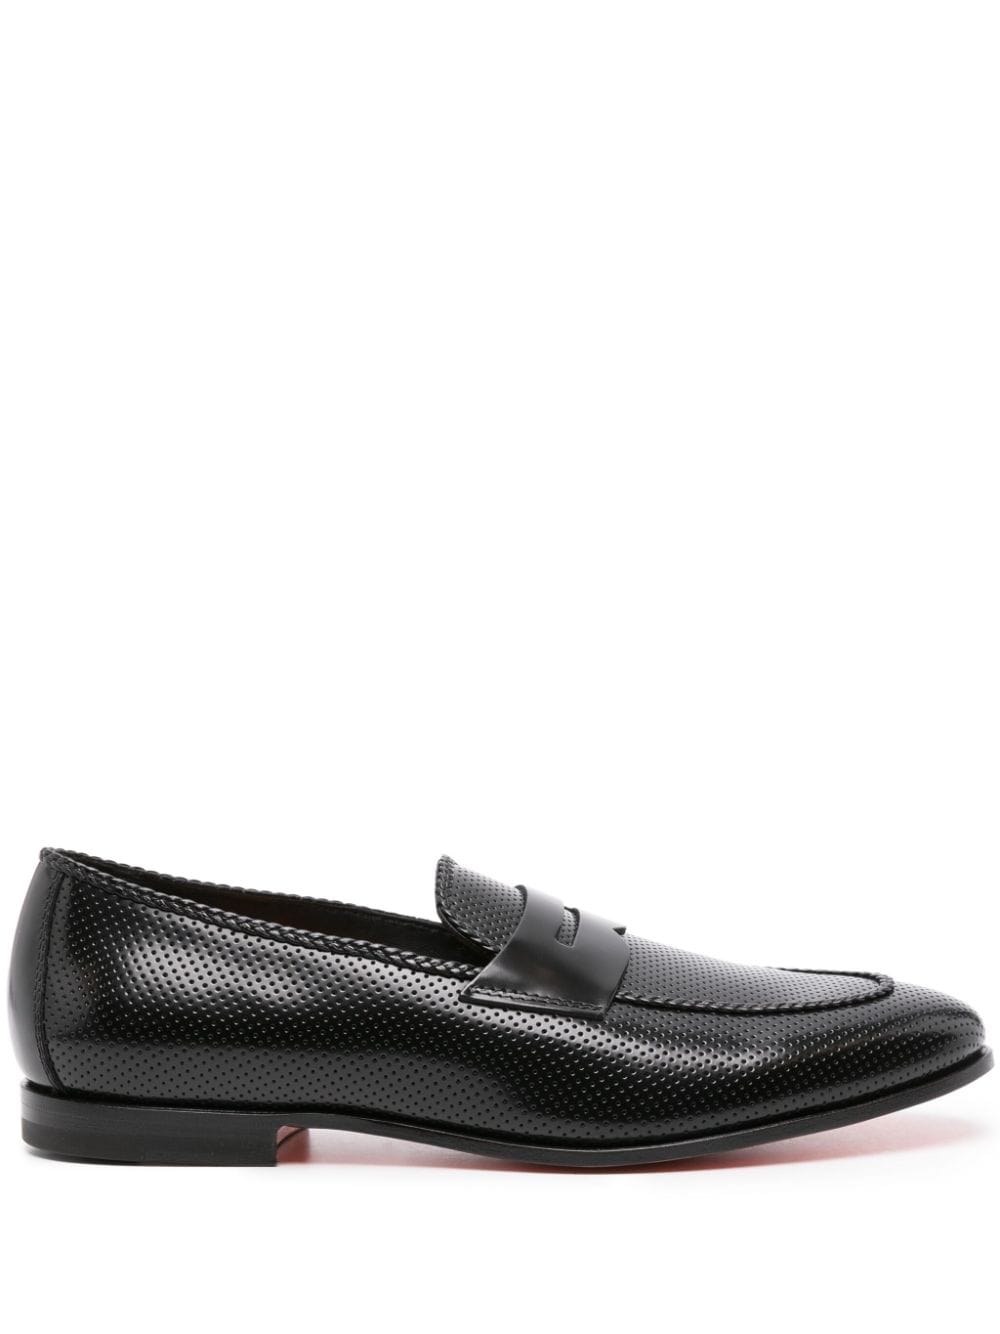 Santoni Perforated Leather Penny Loafers In Black